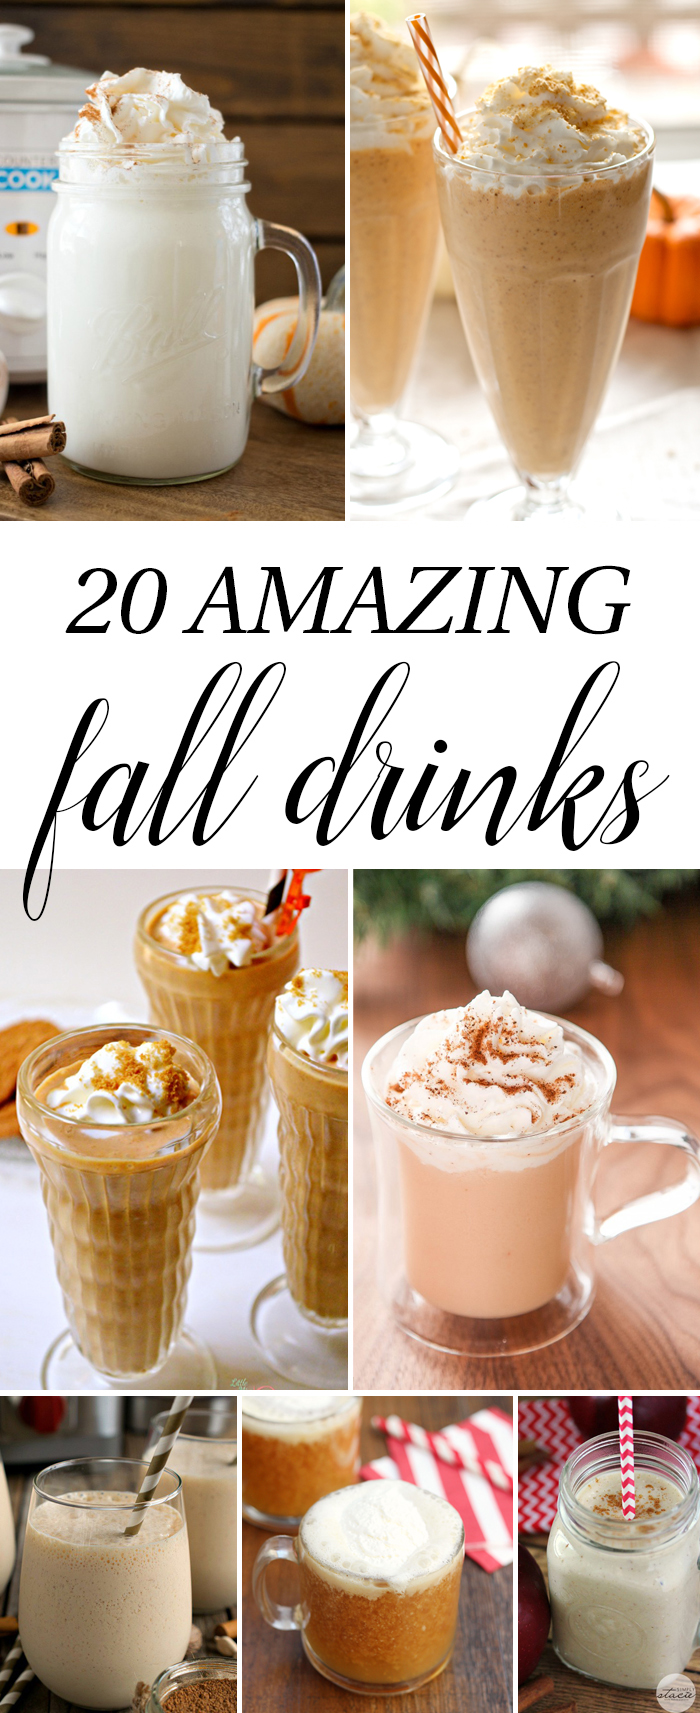 20 Amazing Fall Drinks - apple cider, pumpkin spice, lattes, frappuccinos, caramel, and spice - everything fall for your parties and cool nights! craftaholicsanonymous.net